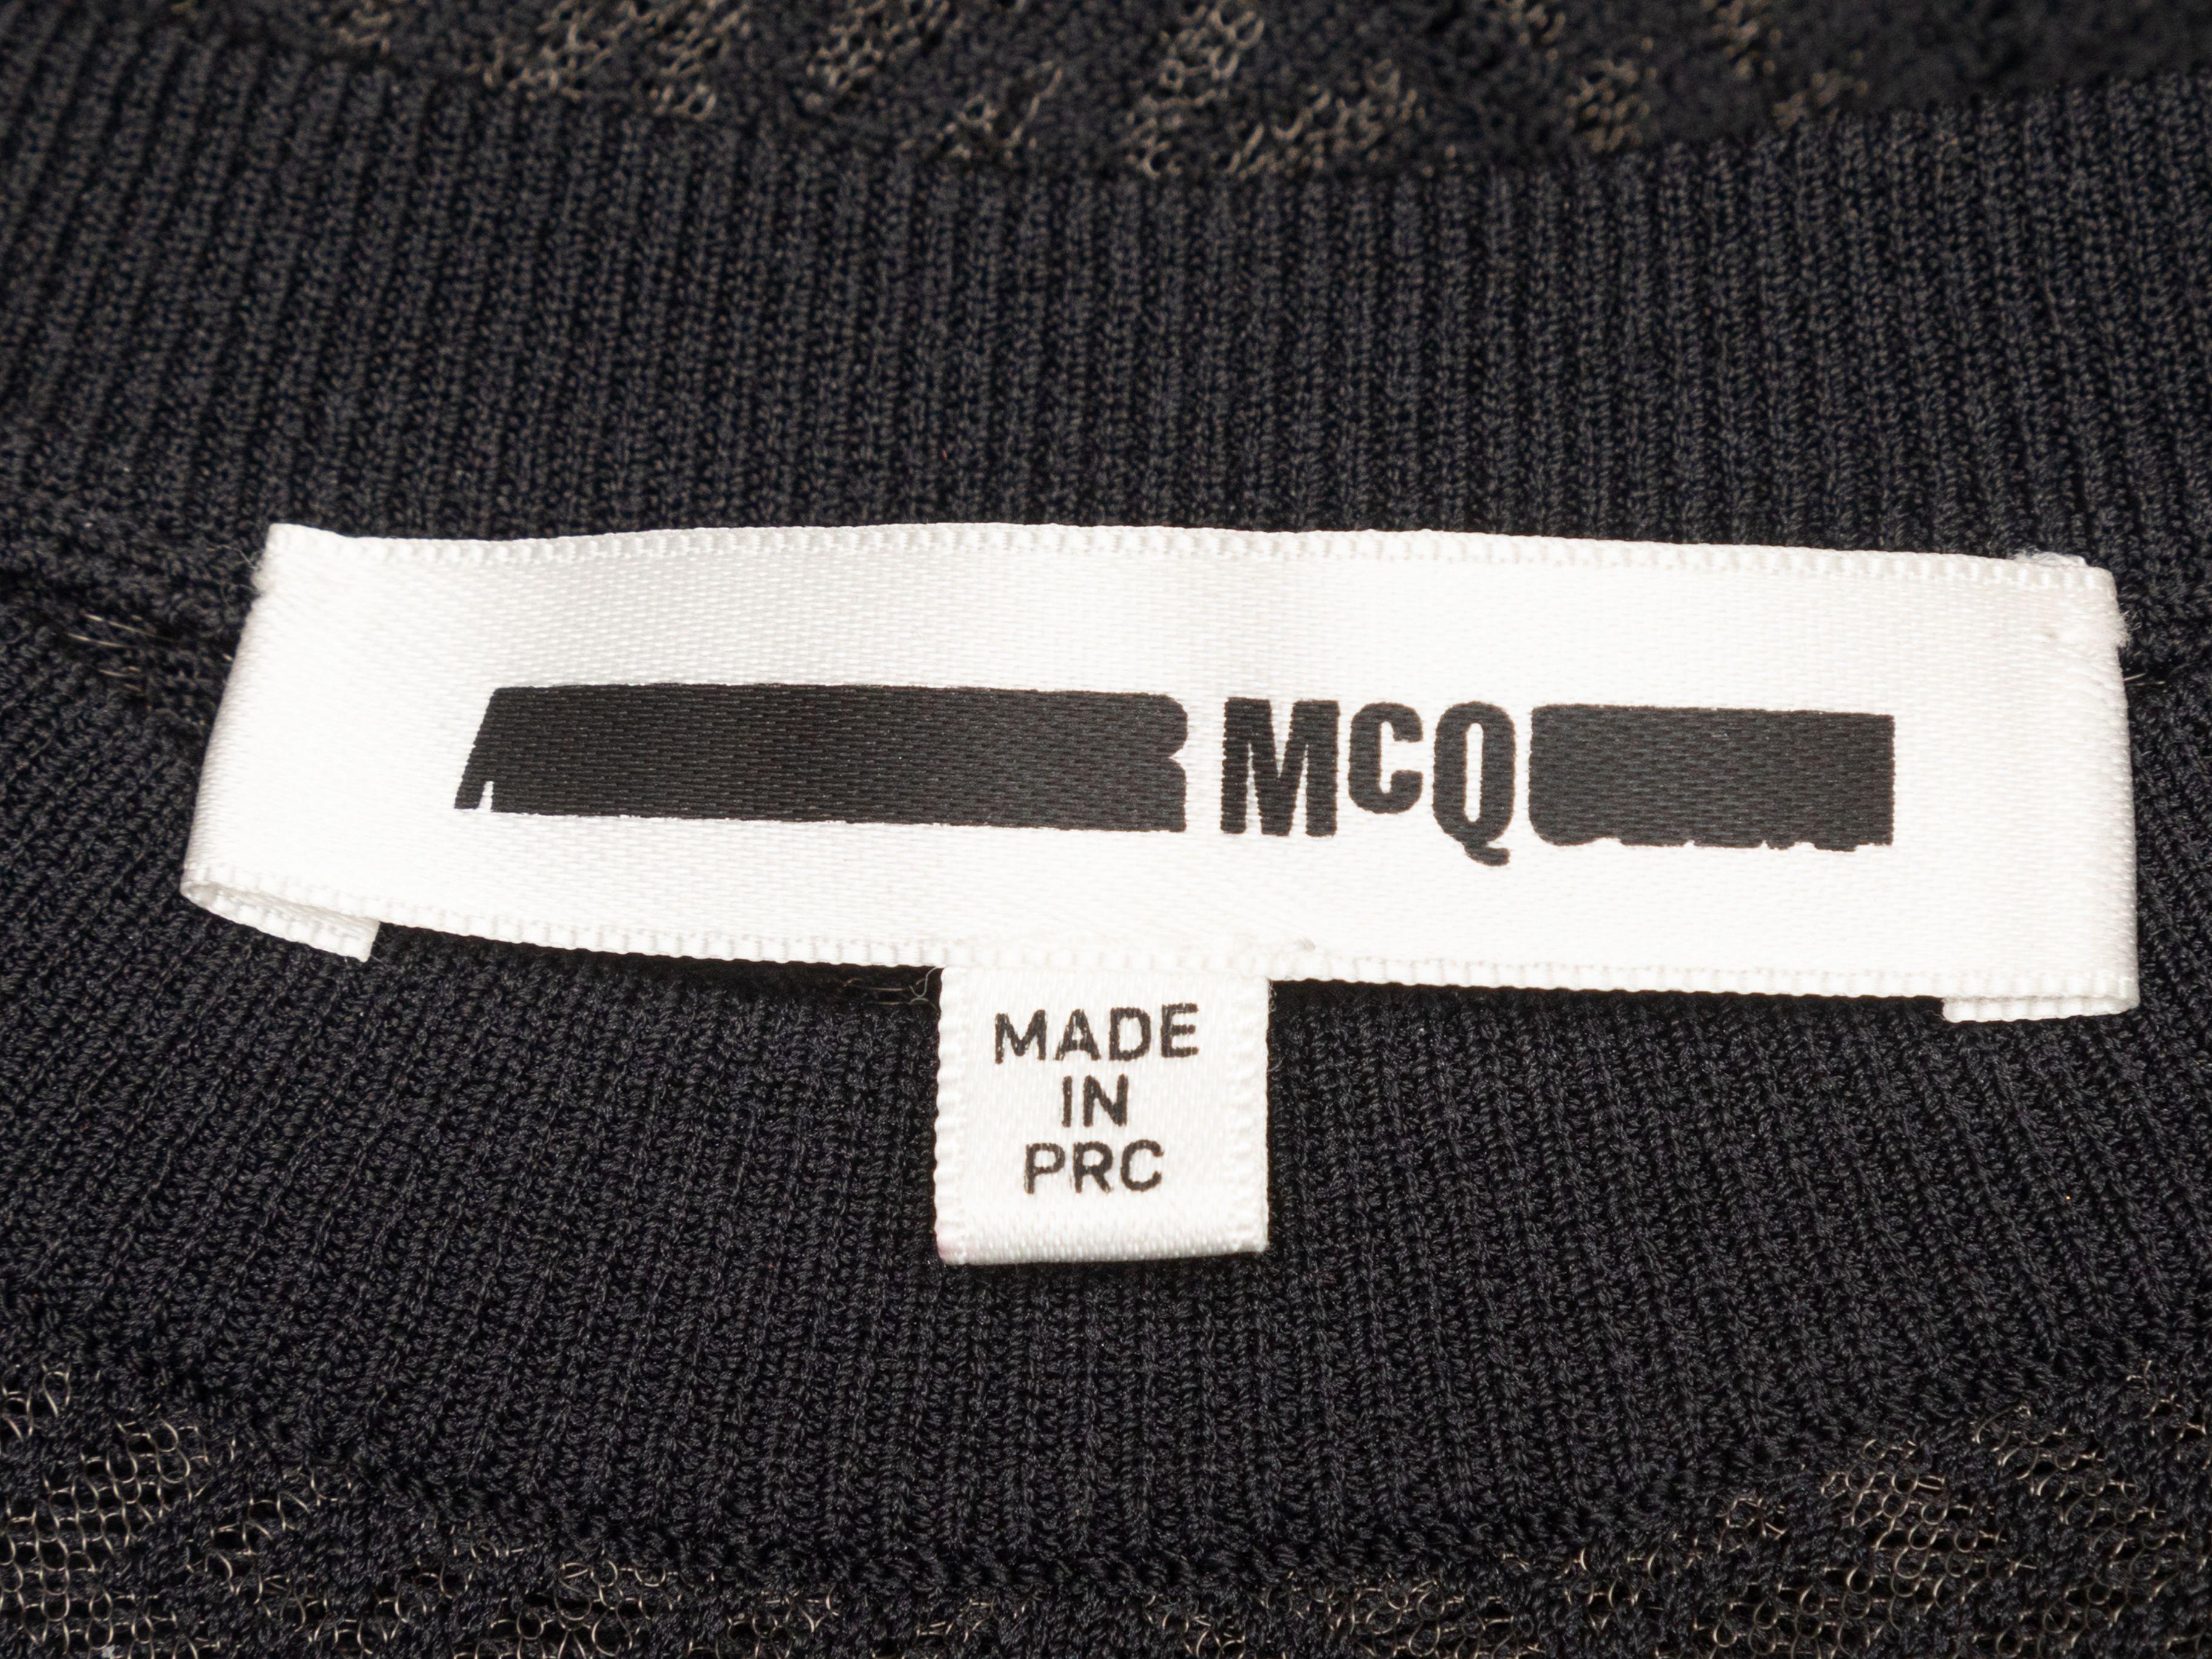 Product Details: Black open knit long sleeve mini dress by McQ Alexander McQueen. Opaque slip at interior. Crew neck. 26